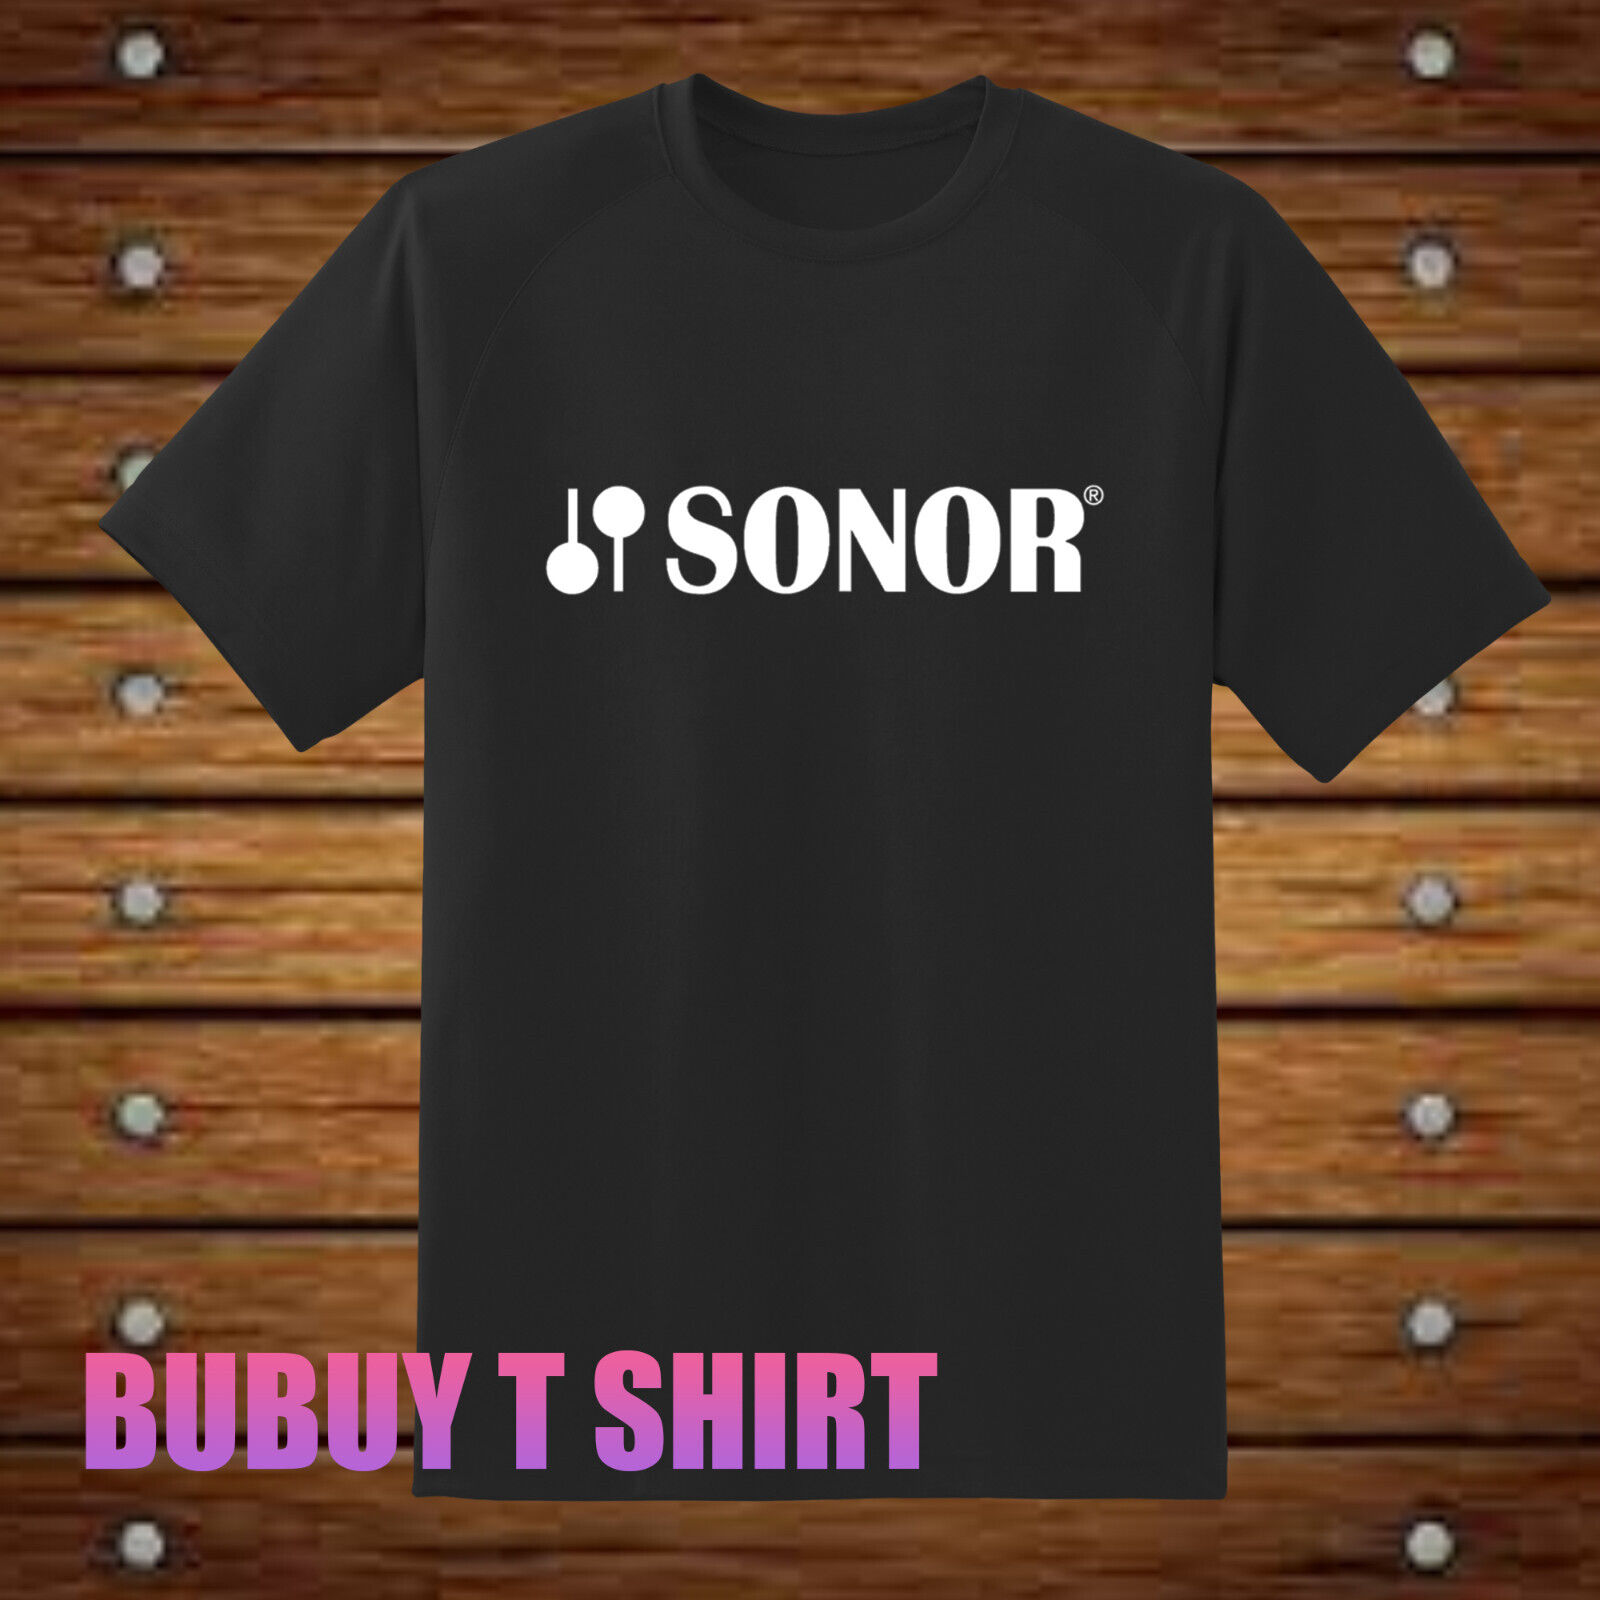 Hot New Sonor Drums Cymbals Logo T Shirt USA Size S - 5XL 